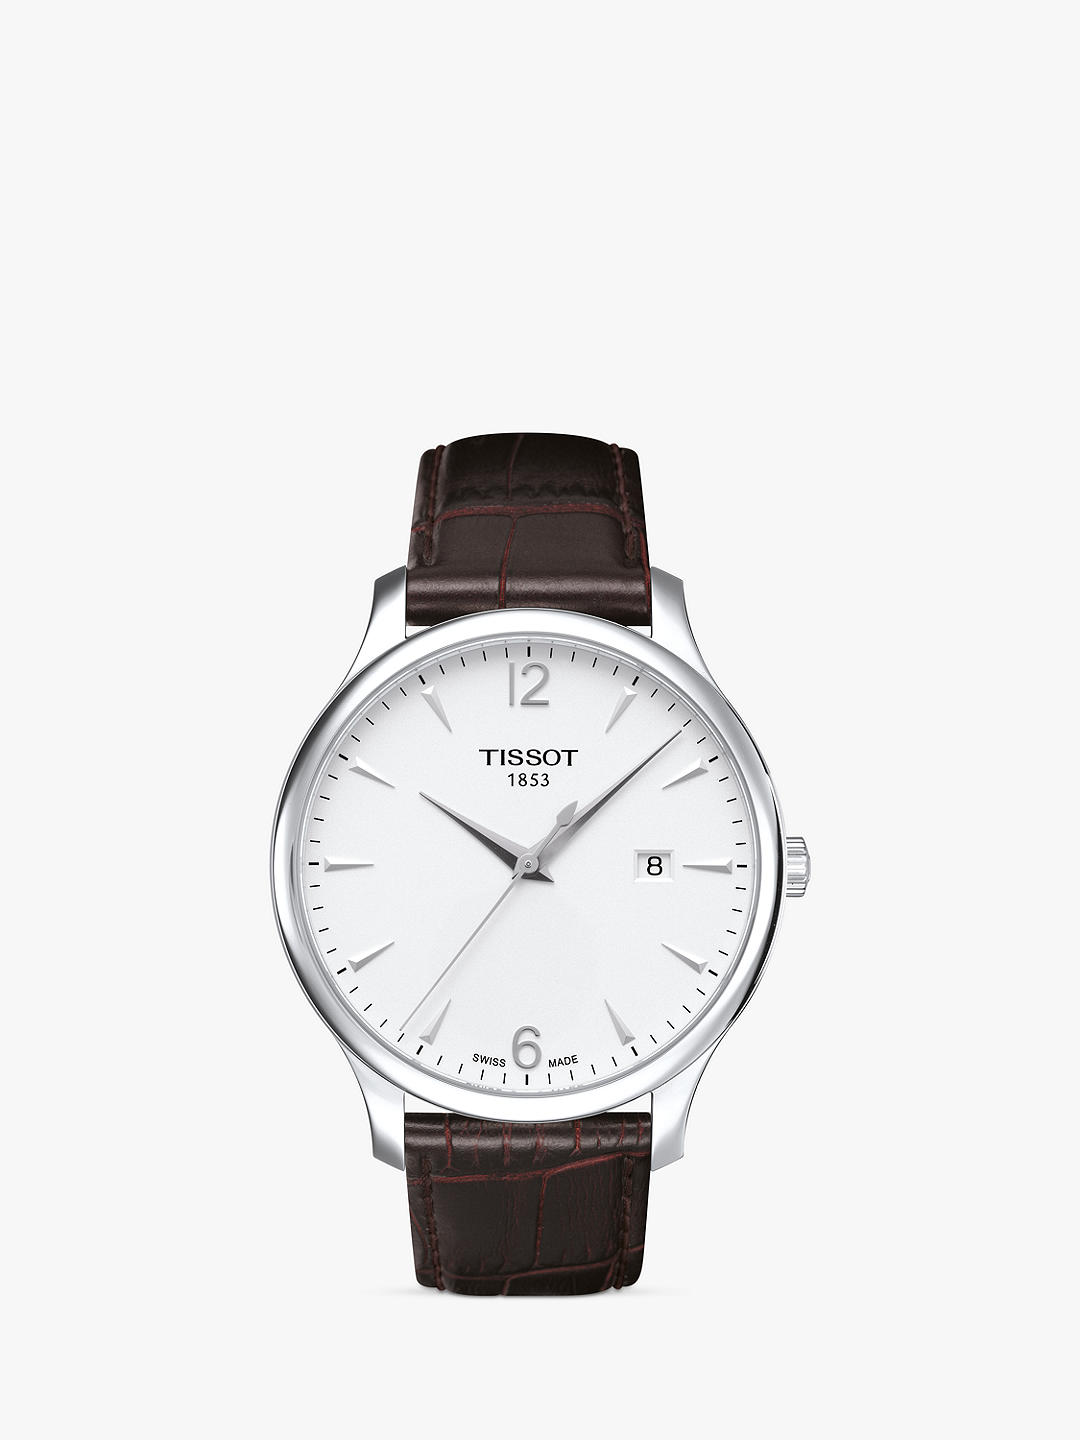 Tissot T0636101603700 Men's Tradition Date Leather Strap Watch, Brown/White